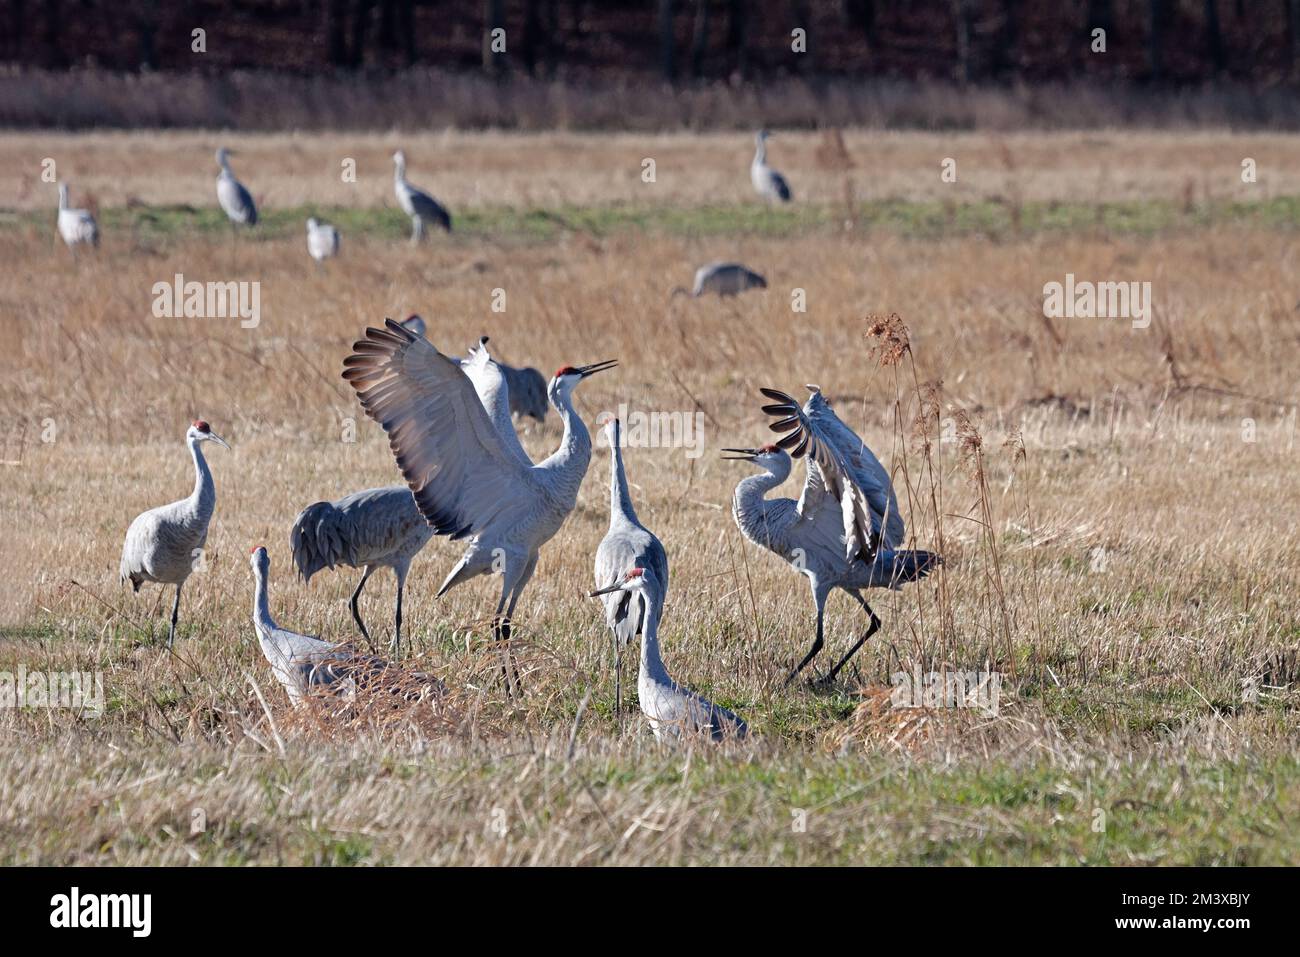 Sandhill cranes dance together in a recently plowed cornfield. Stock Photo